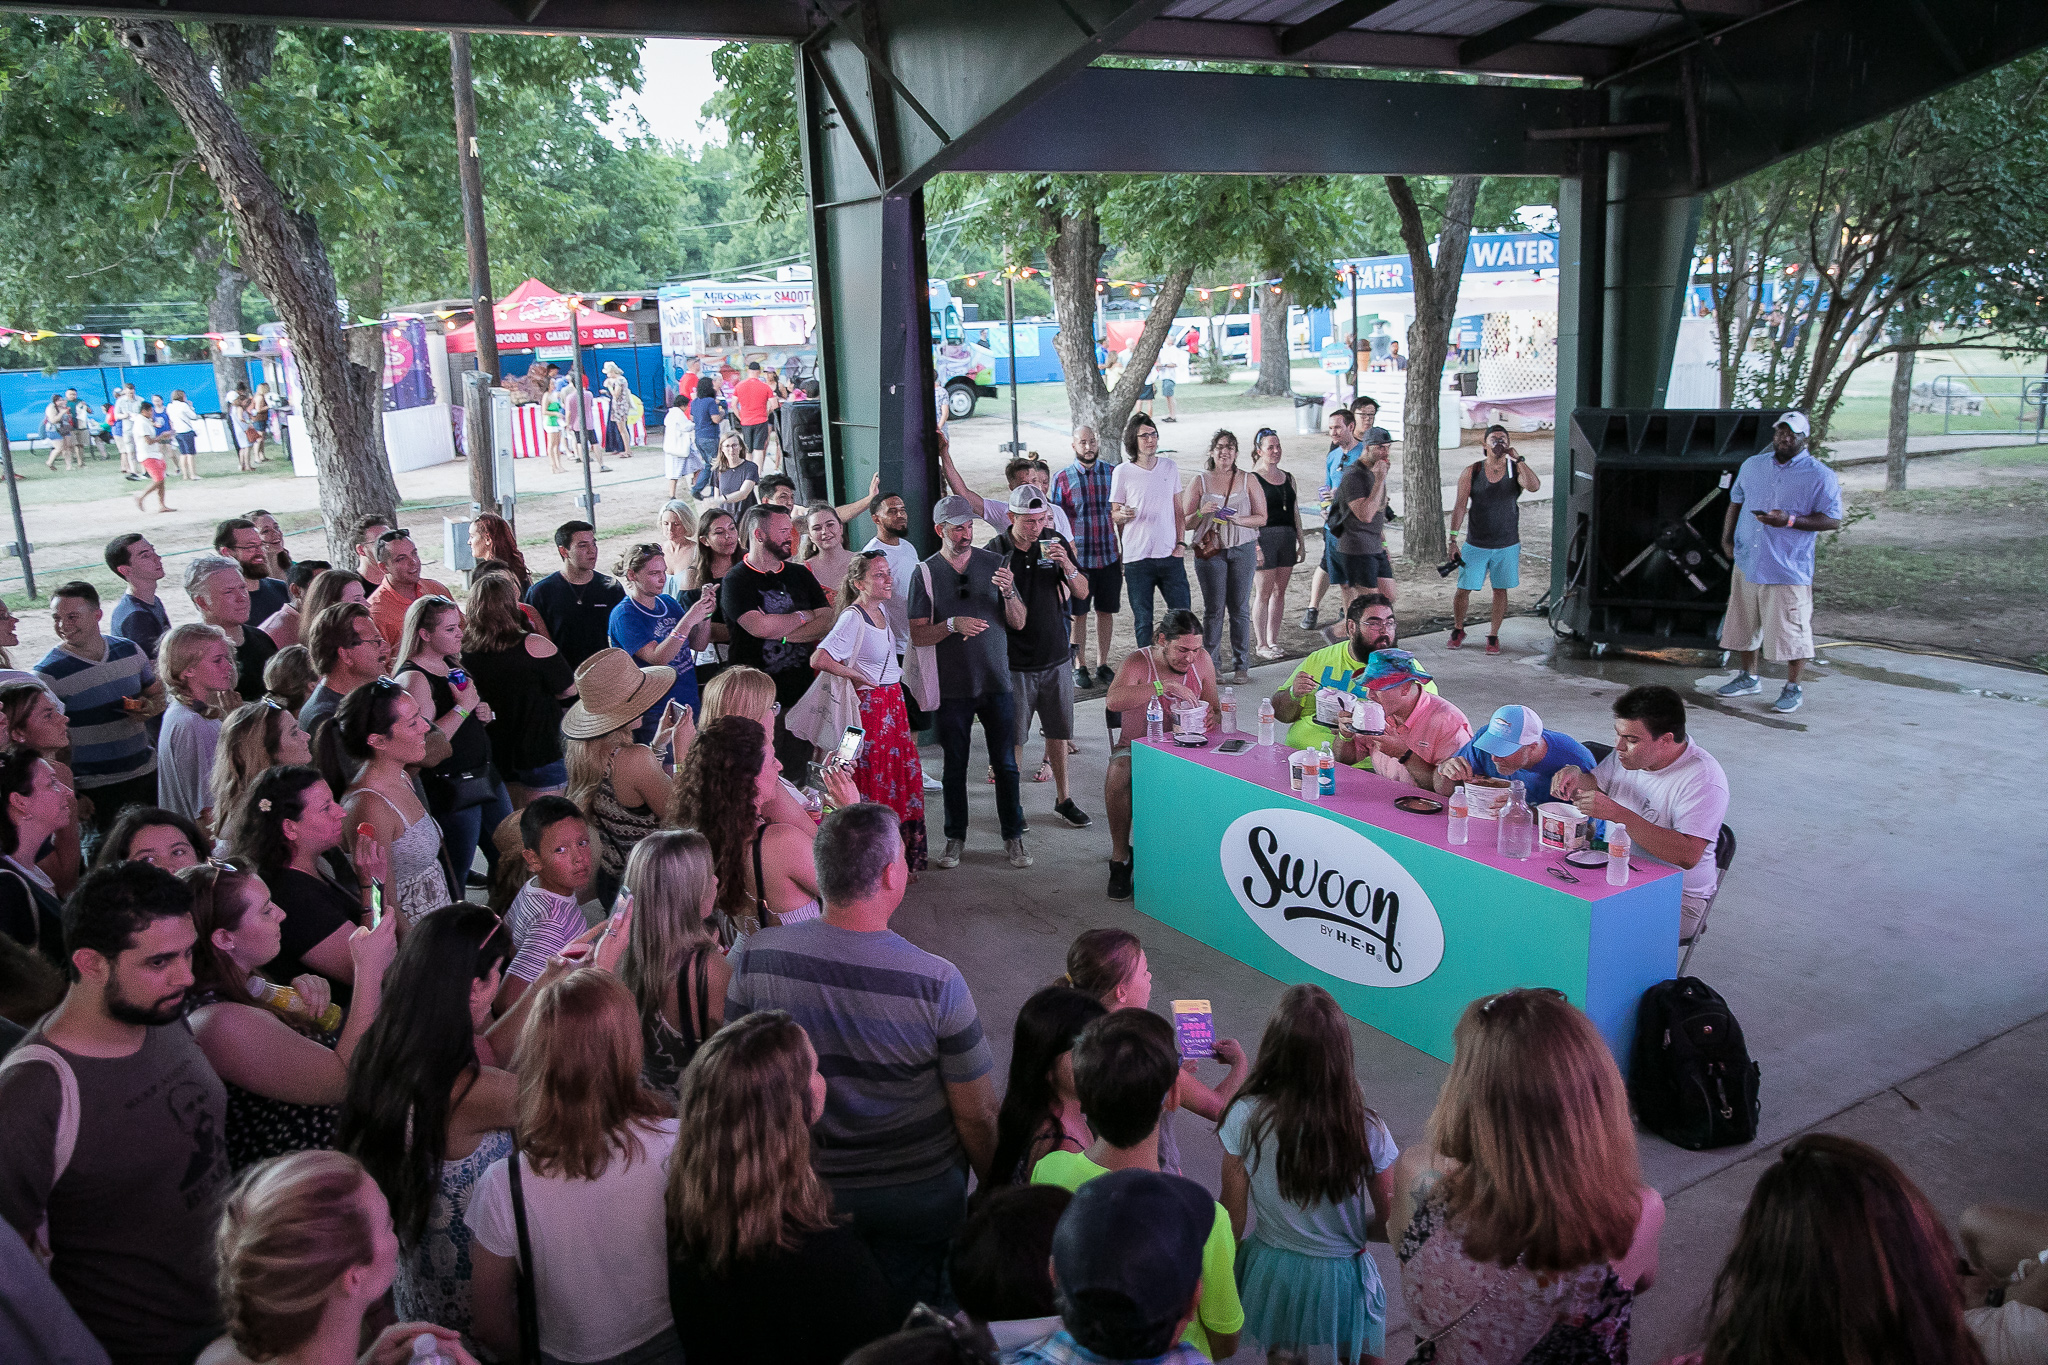 Picture of the custom bar made for the ice cream eating contest.